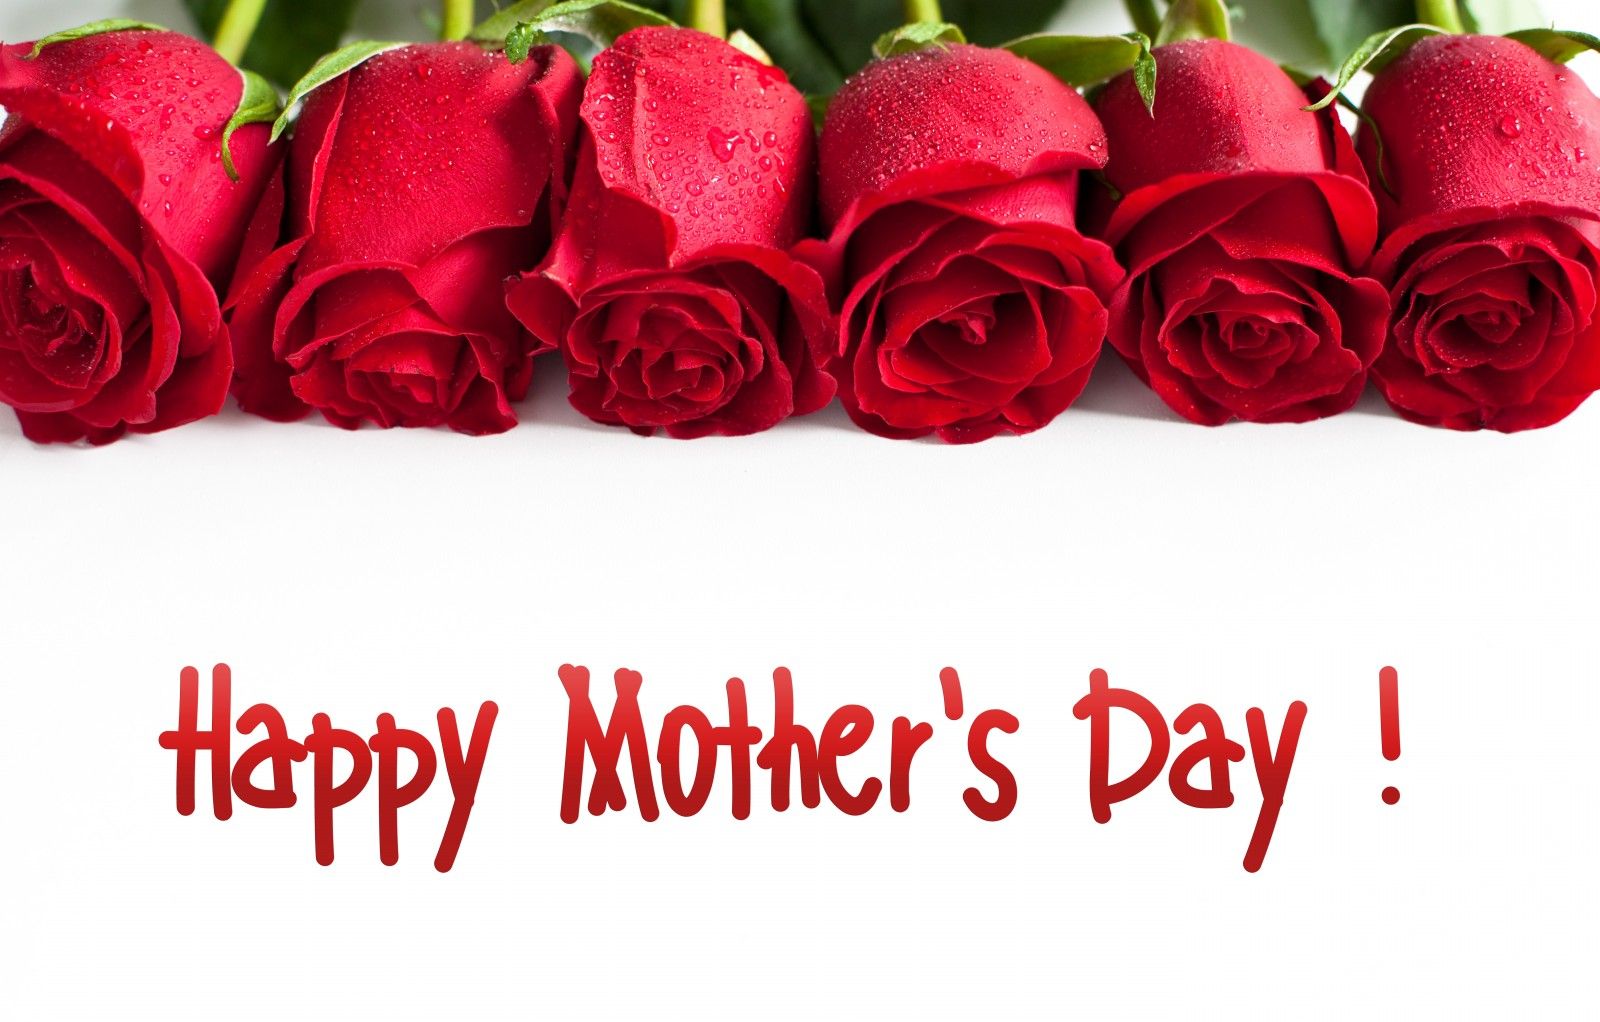 Happy Mothers Day Image Picture Photo Pic HD Wallpaper 2019